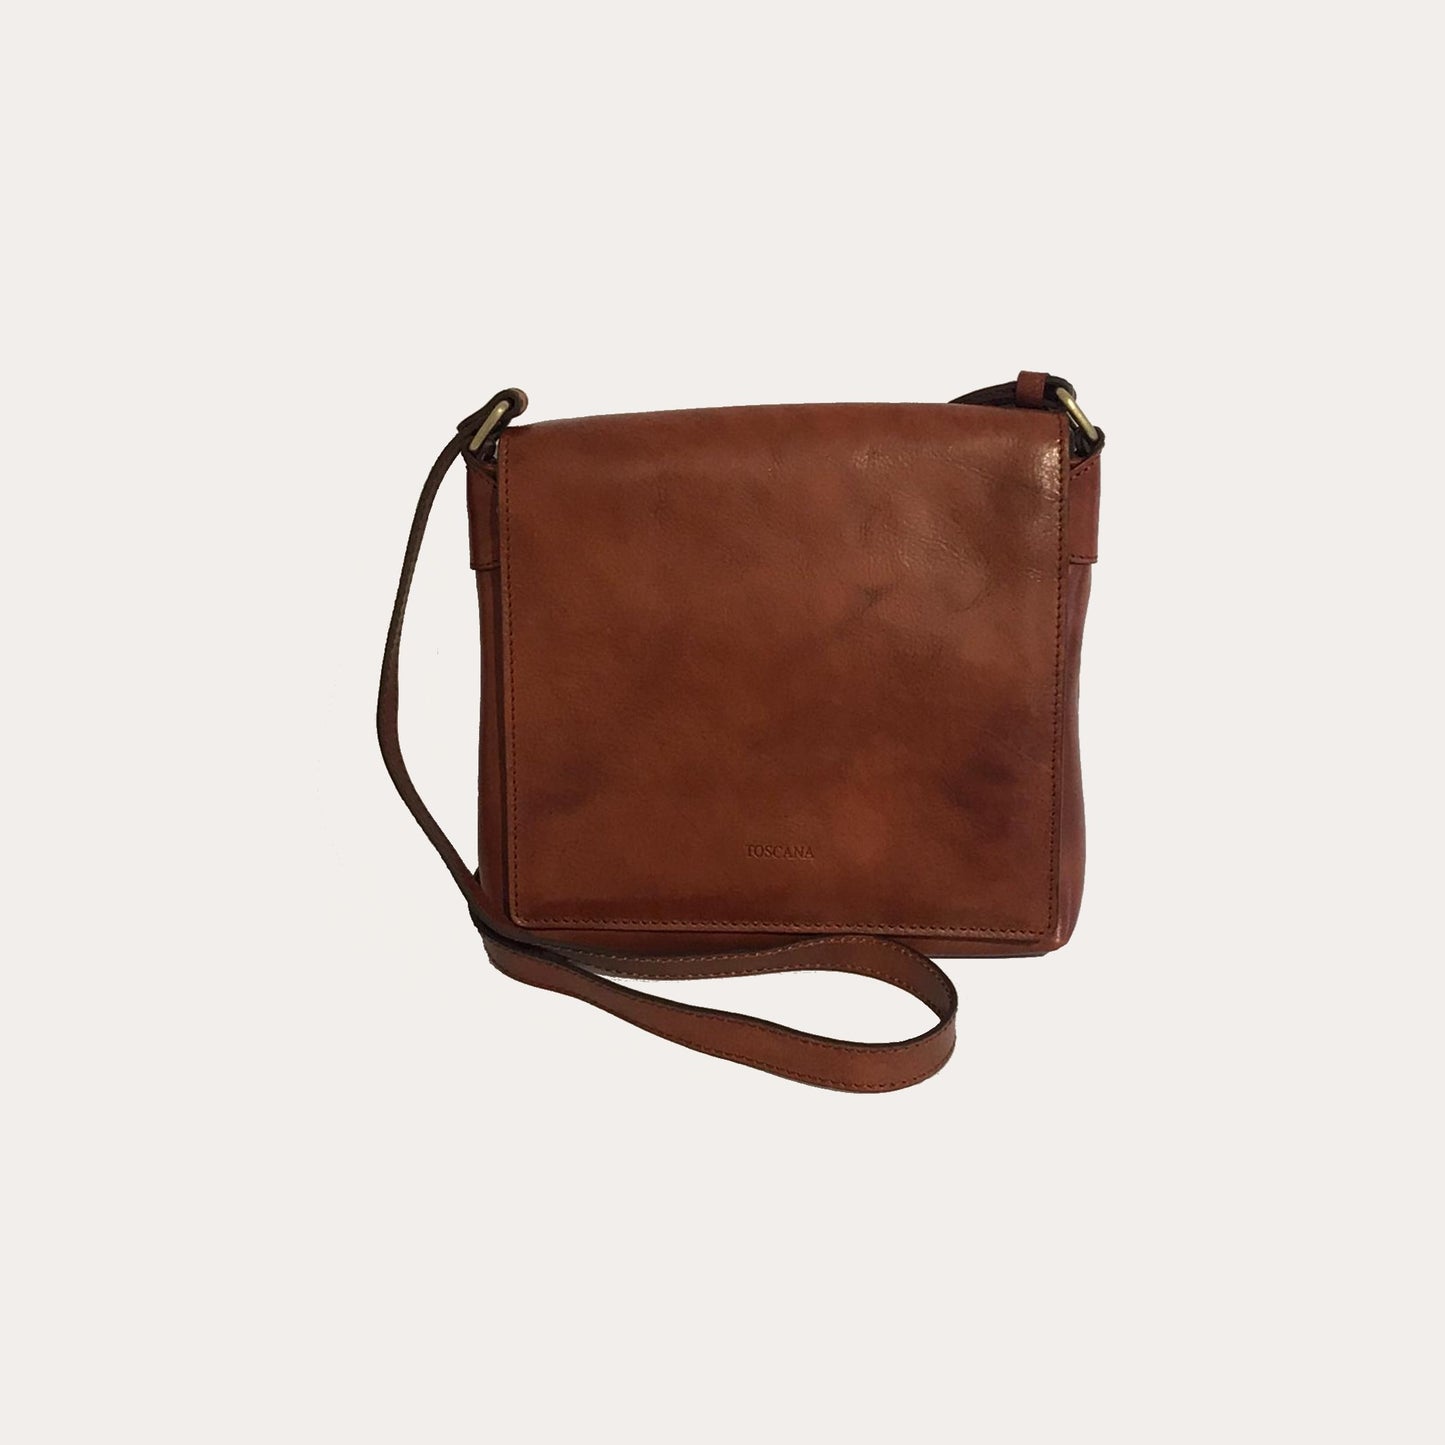 Tan Leather Bag with Flap